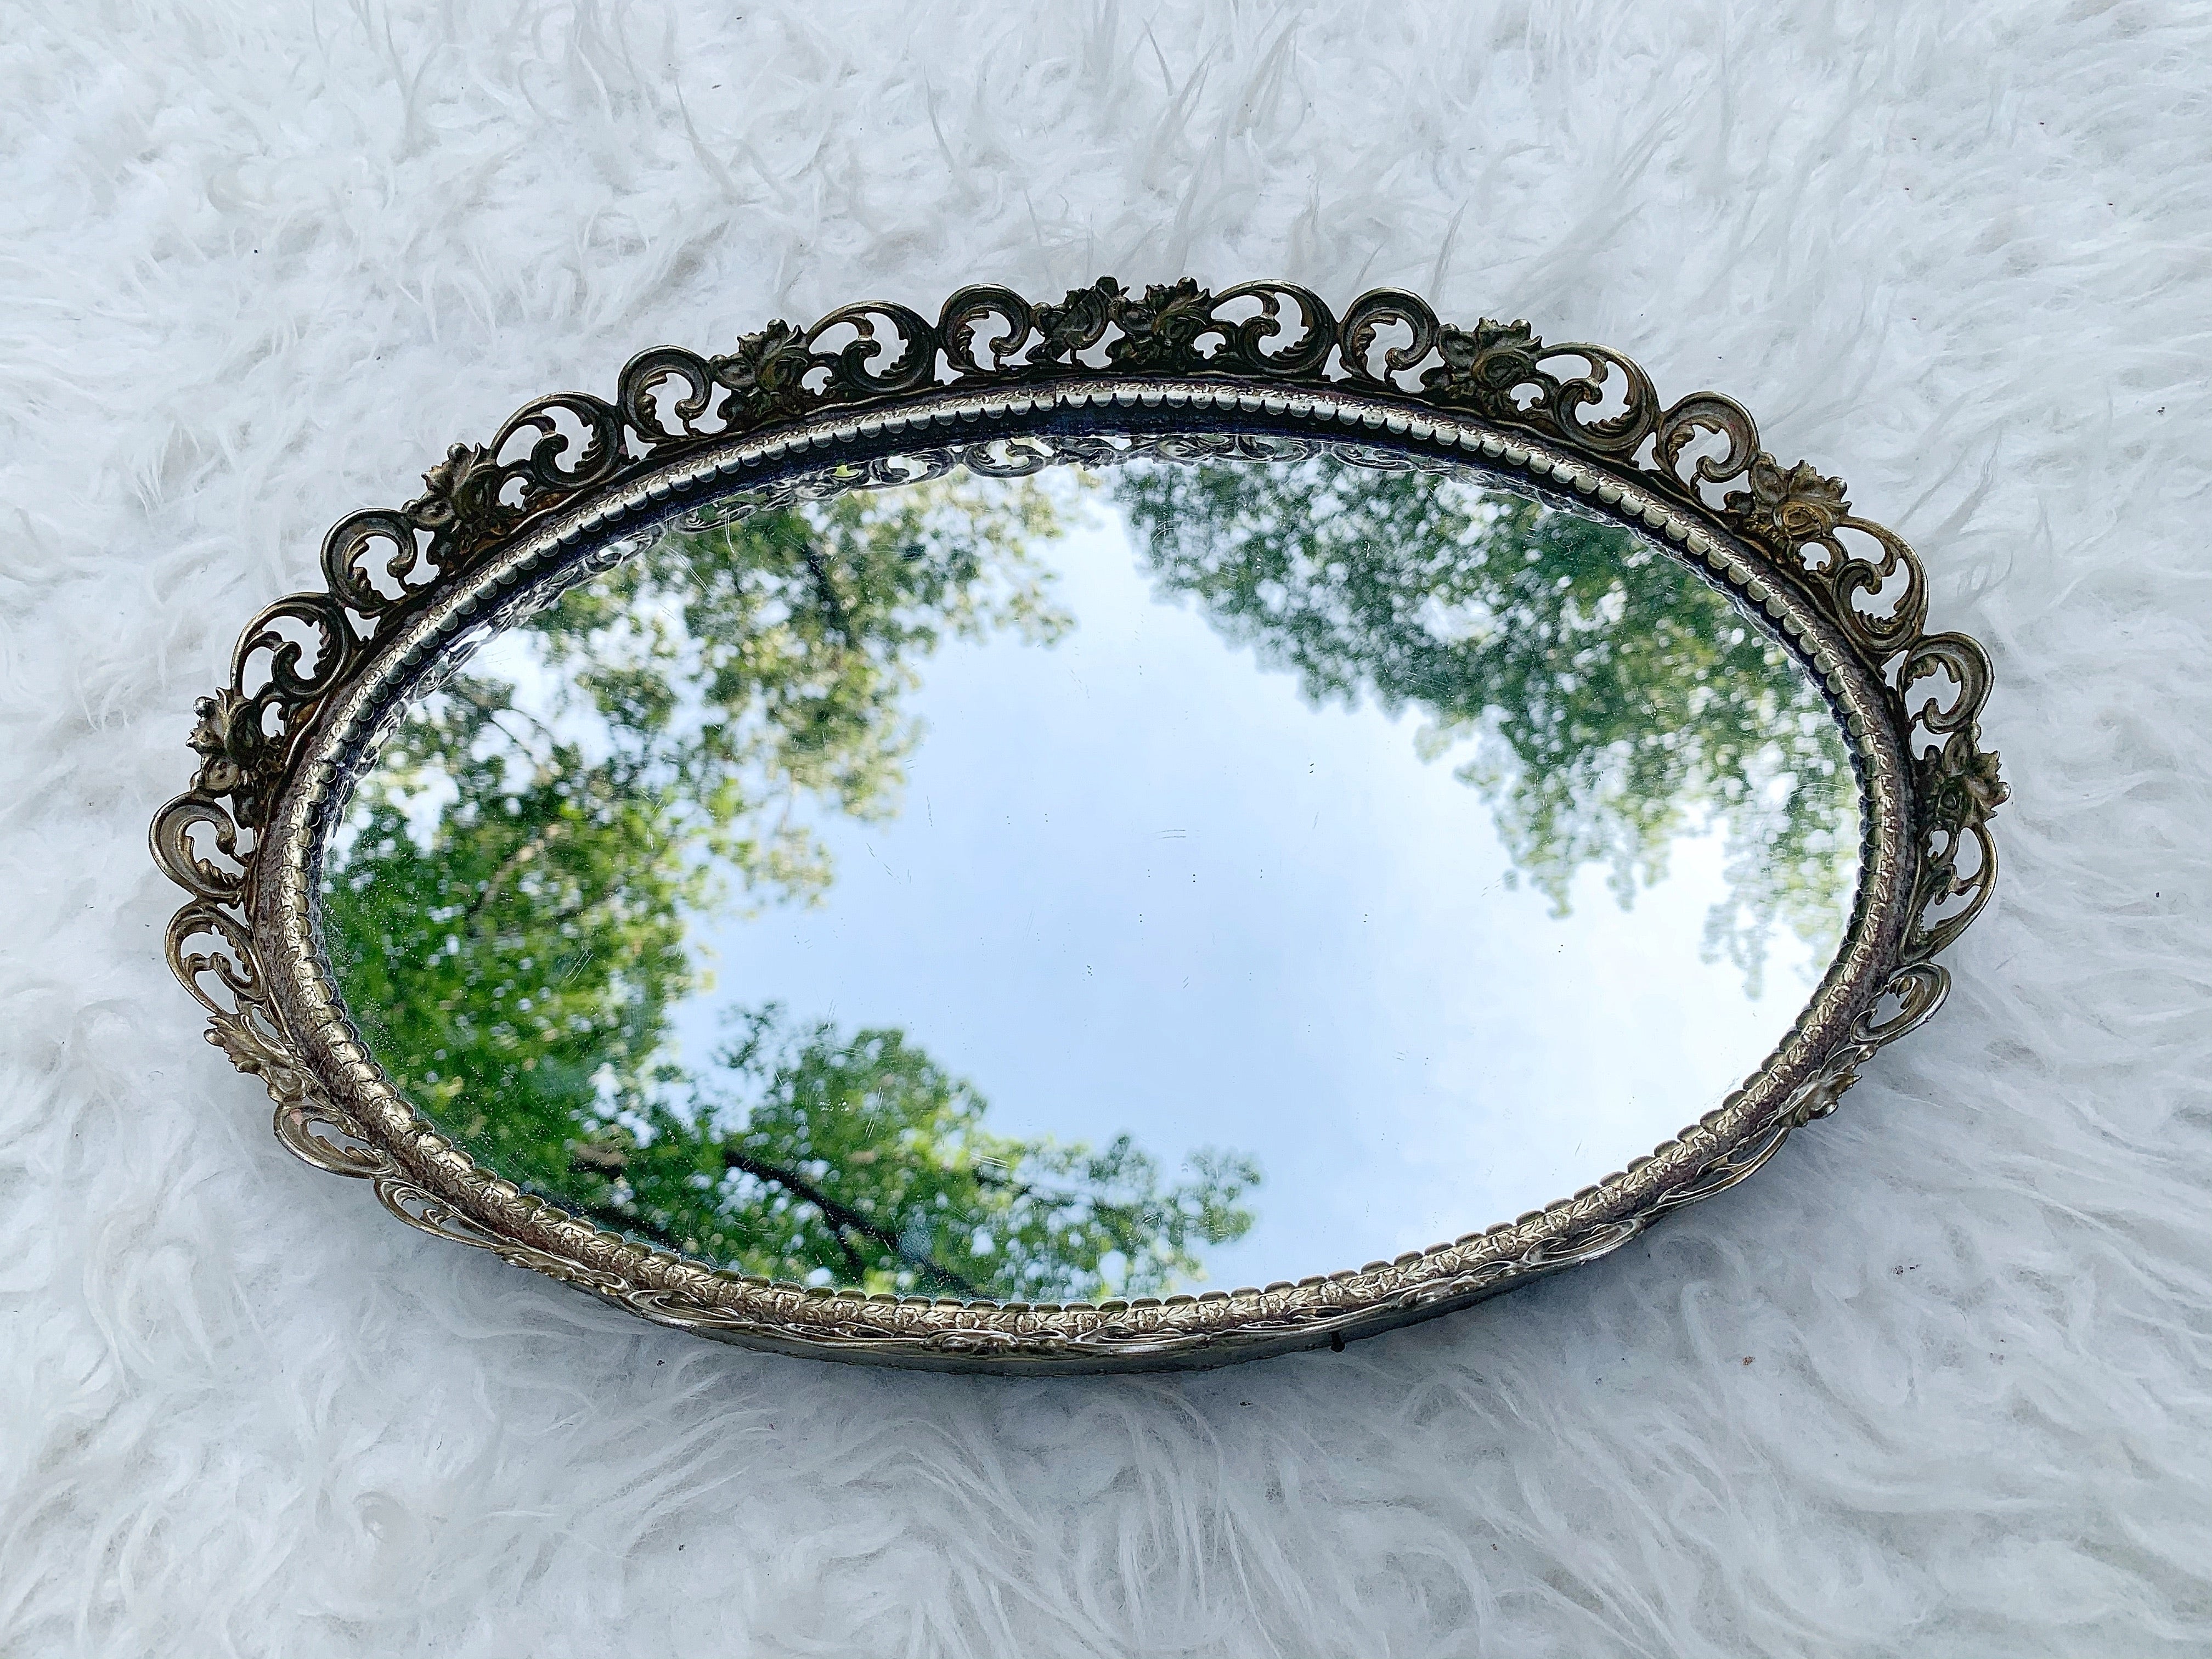 Antique Oval Filigree Lace Mirror Tray